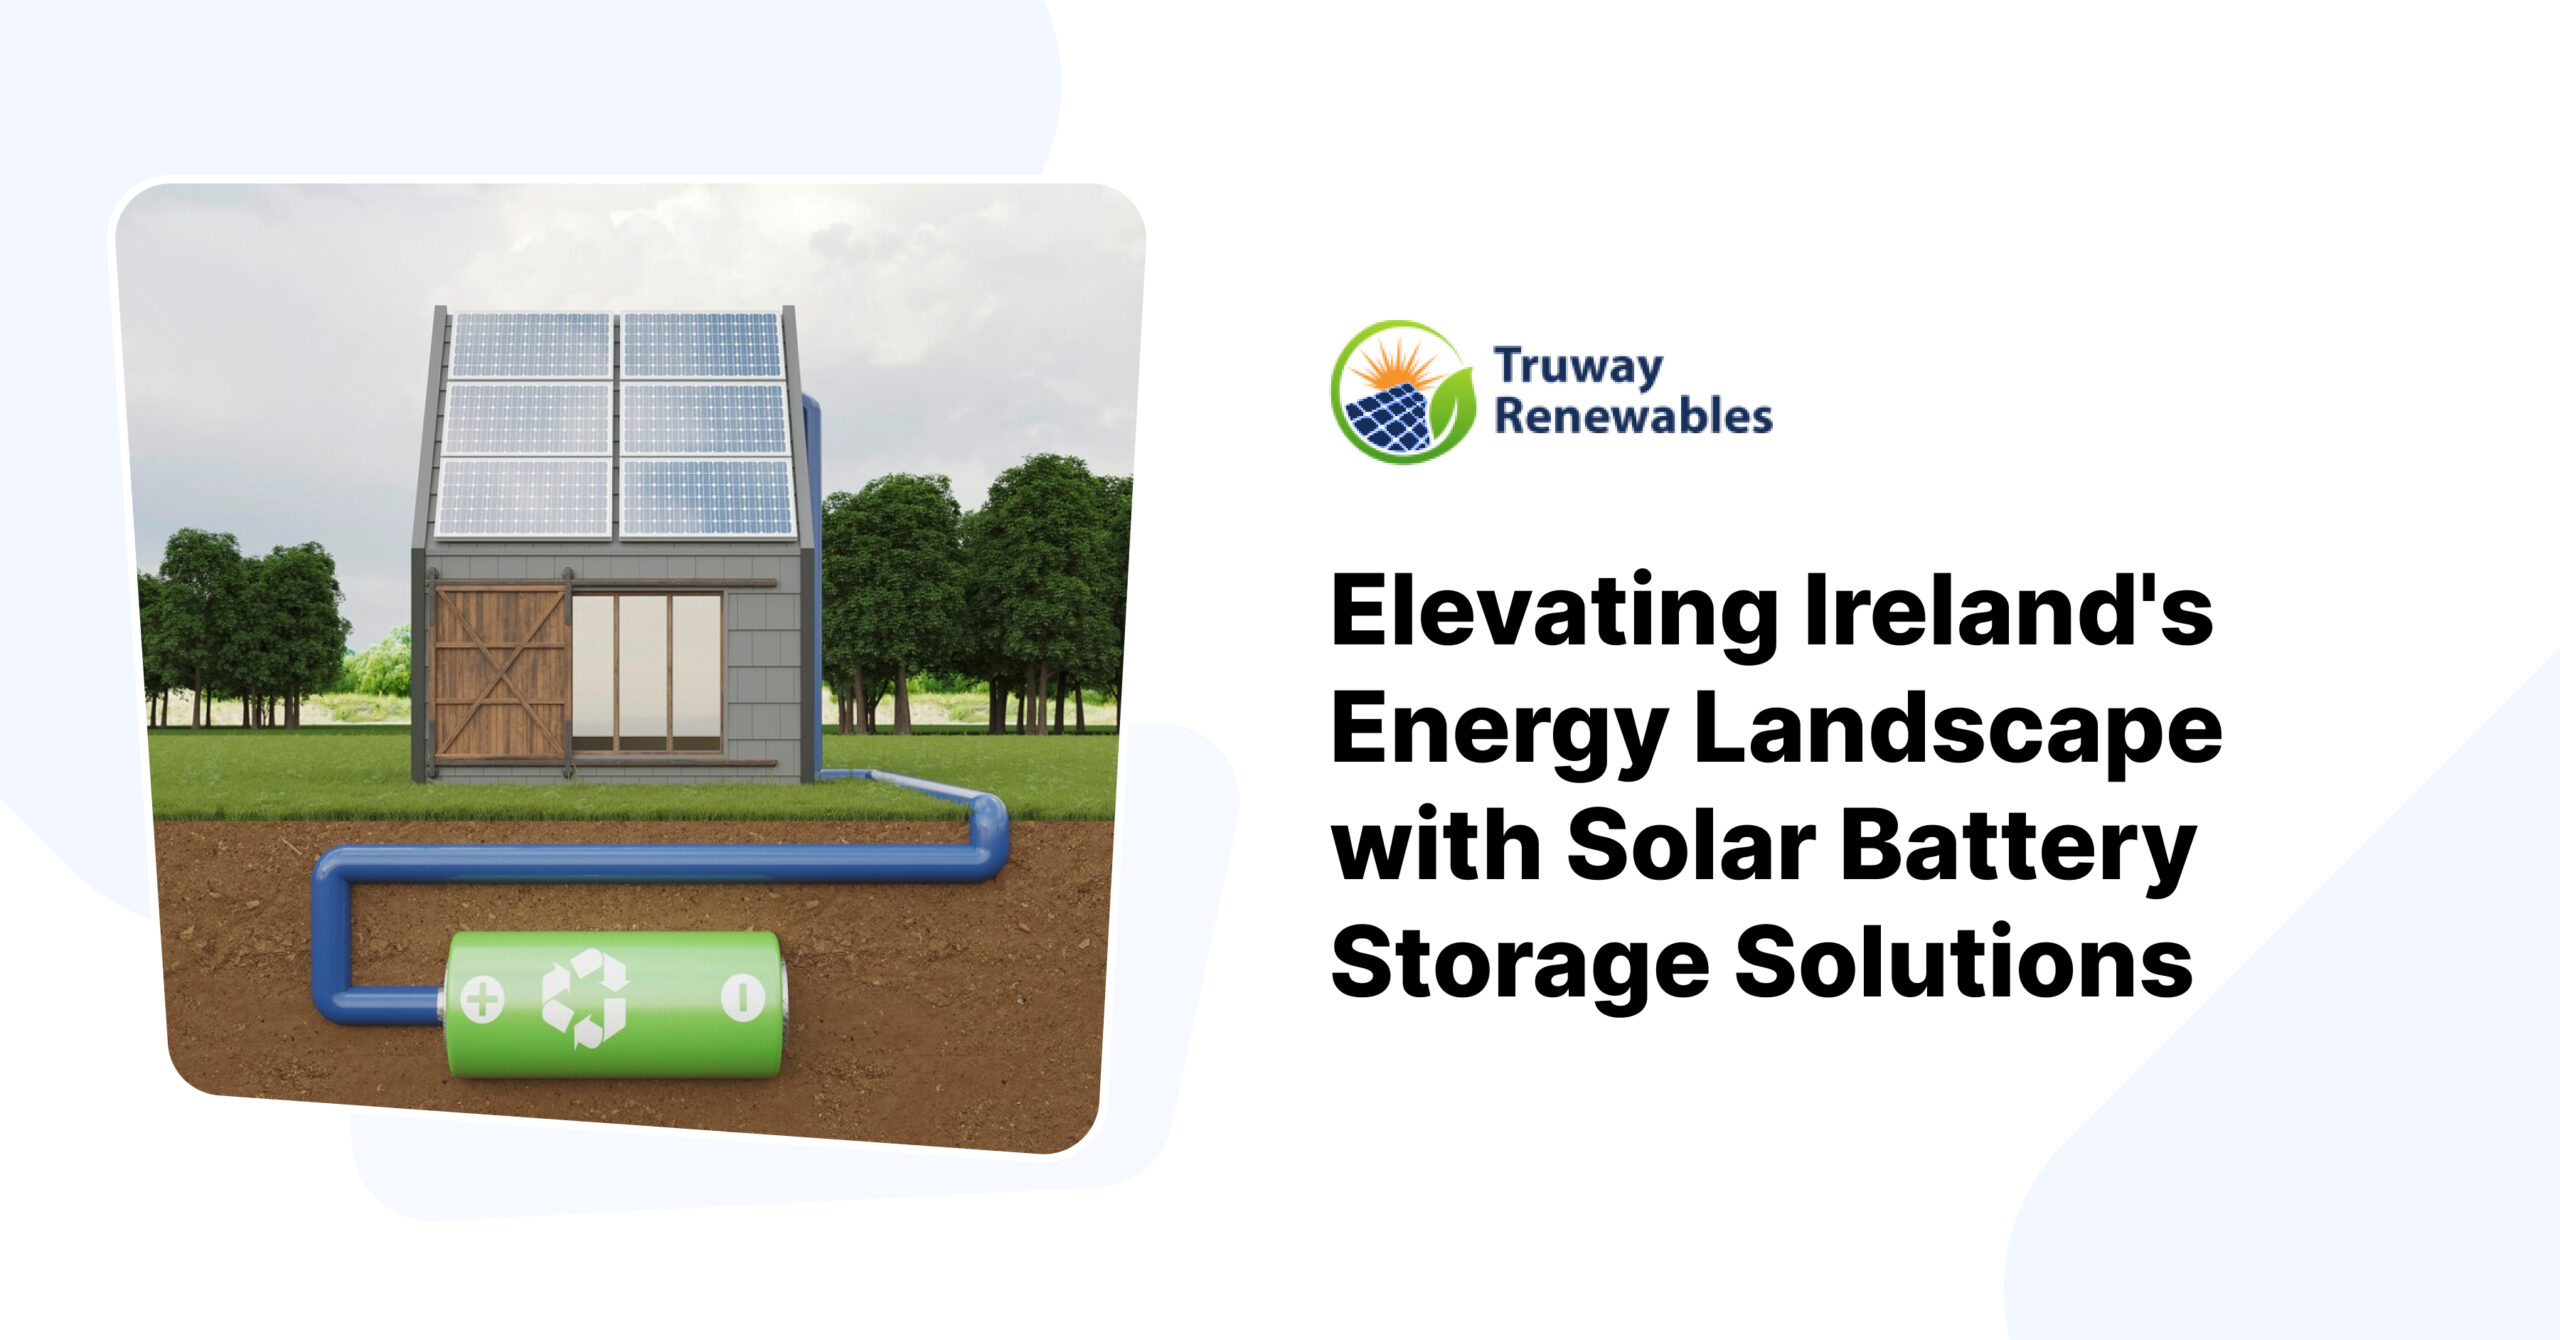 Elevating Ireland’s Energy Landscape with Solar Battery Storage Solutions